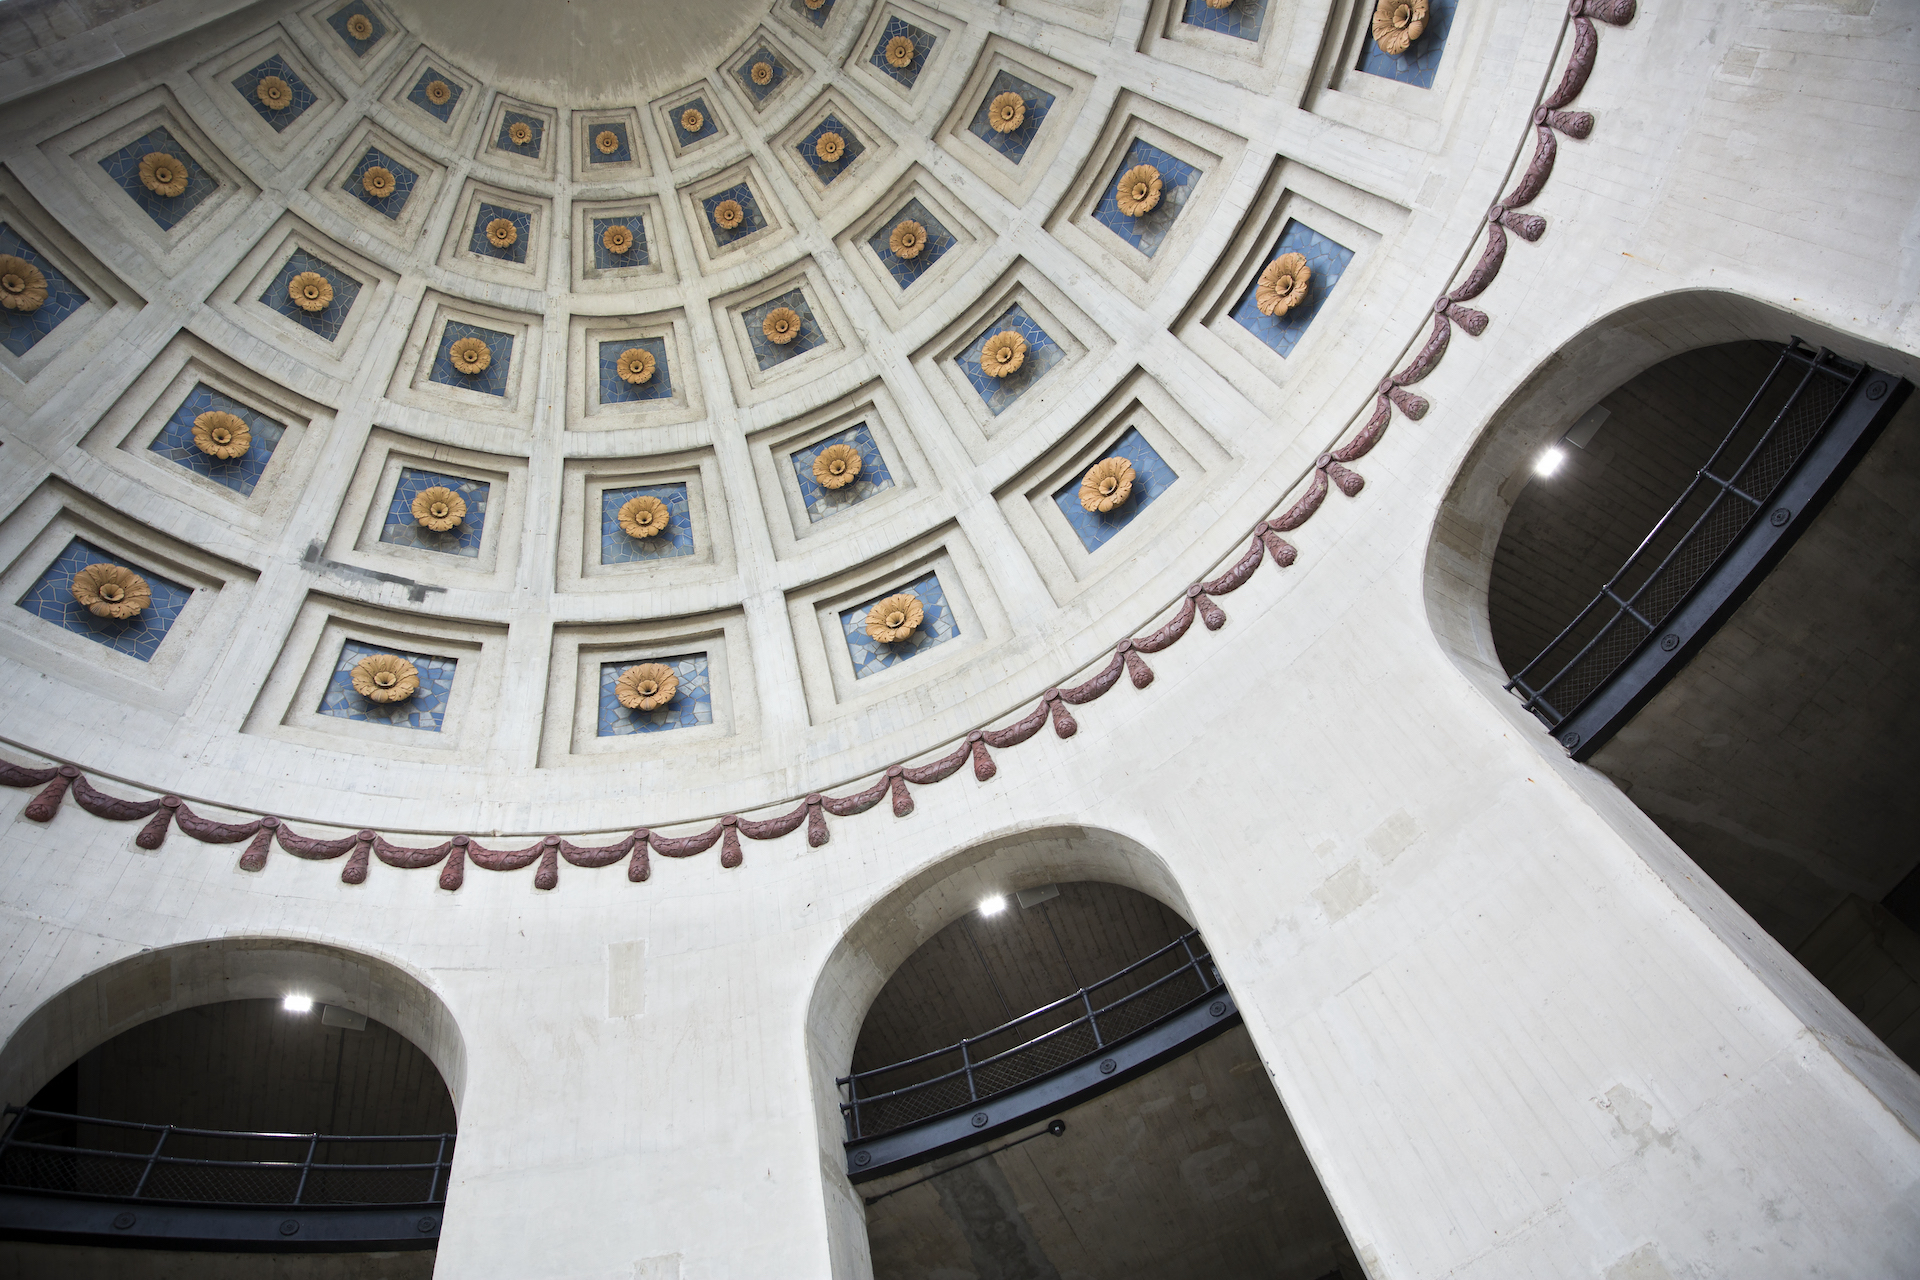 Picture of a domed ceiling at Ohio Stadium.